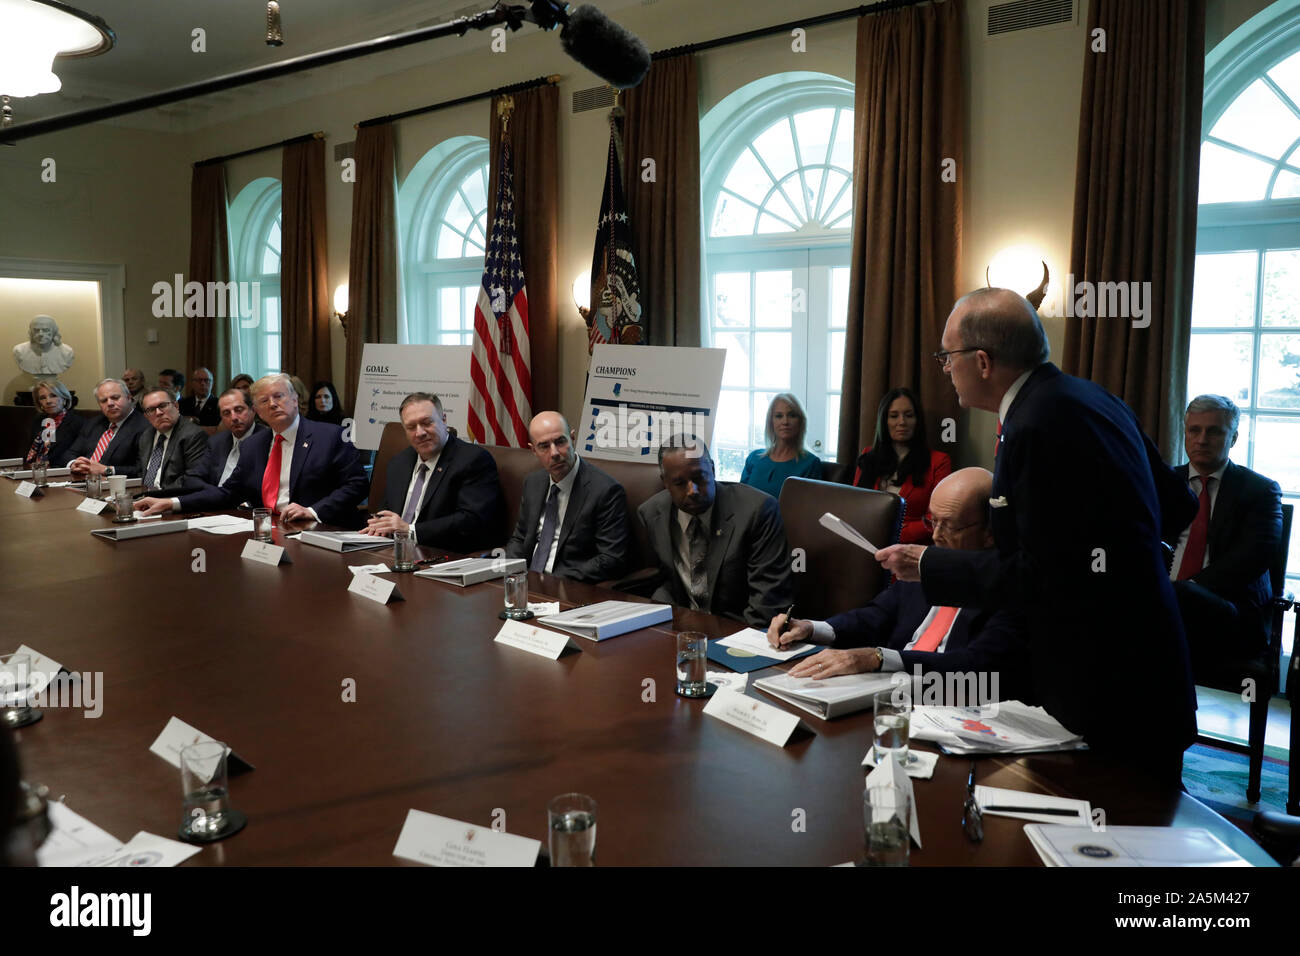 Director of the National Economic Council Larry Kudlow talks to United States President Donald J. Trump during a Cabinet Meeting at the White House in Washington, DC on October 21, 2019. Pictured from left to right: US Secretary of Education Betsy DeVos, US Secretary of the Interior David Bernhardt, Administrator of the US Environmental Protection Agency Andrew Wheeler, US Secretary of Health and Human Services (HHS) Alex Azar, The President, US Secretary of State Mike Pompeo, US Secretary of Labor Eugene Scalia, US Secretary of Housing and Urban Development (HUD) Ben Carson, US Secretary of C Stock Photo